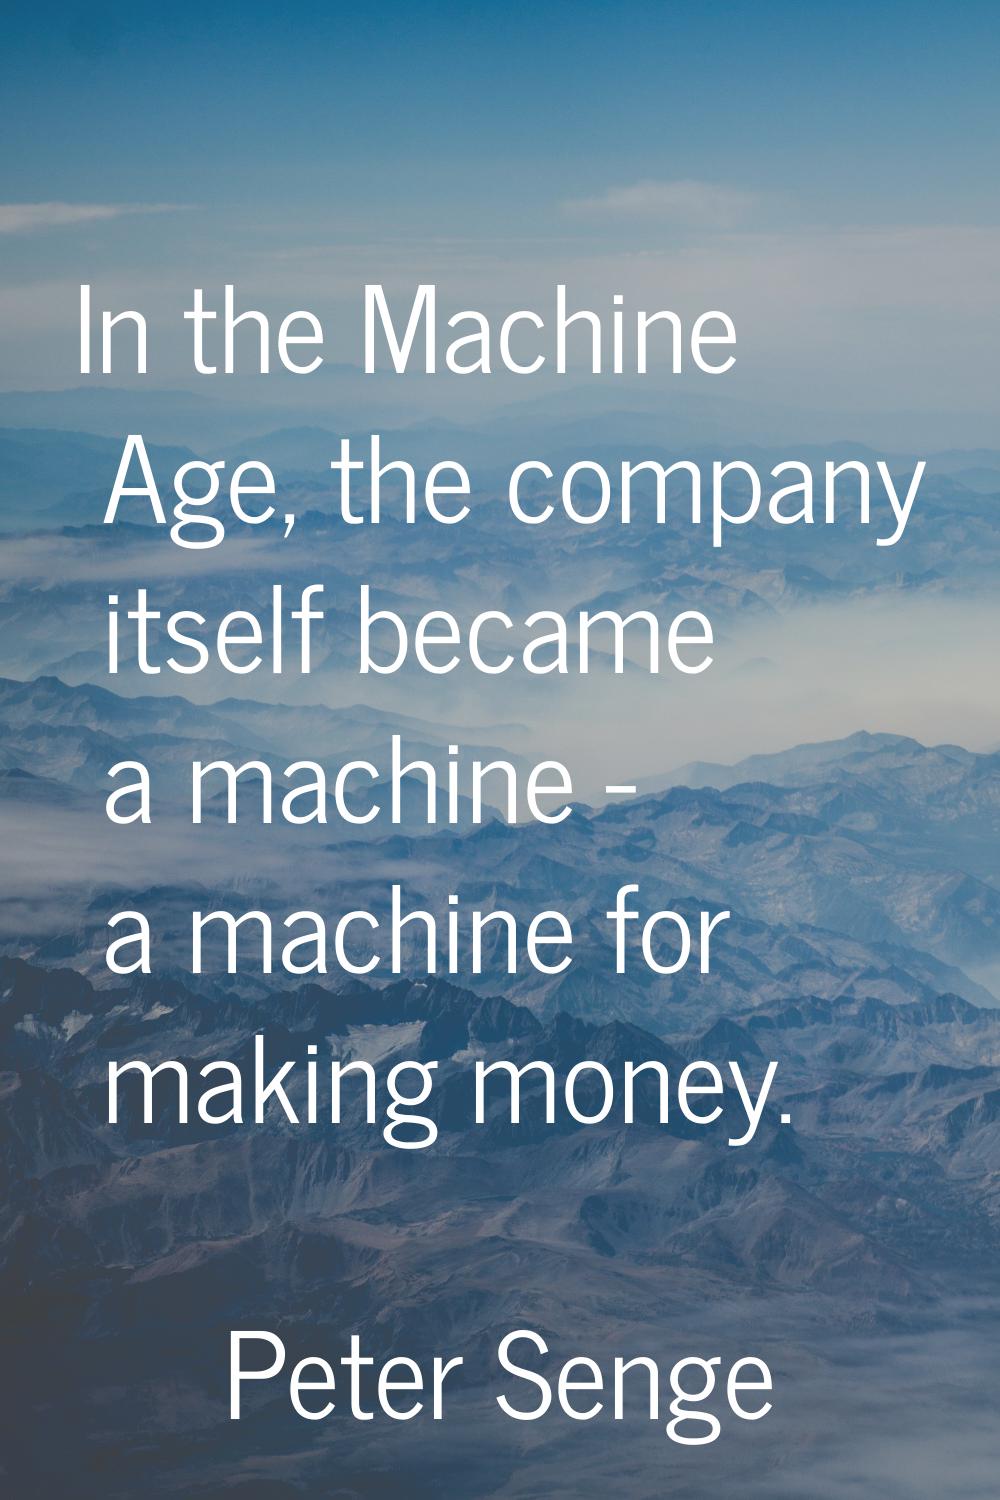 In the Machine Age, the company itself became a machine - a machine for making money.